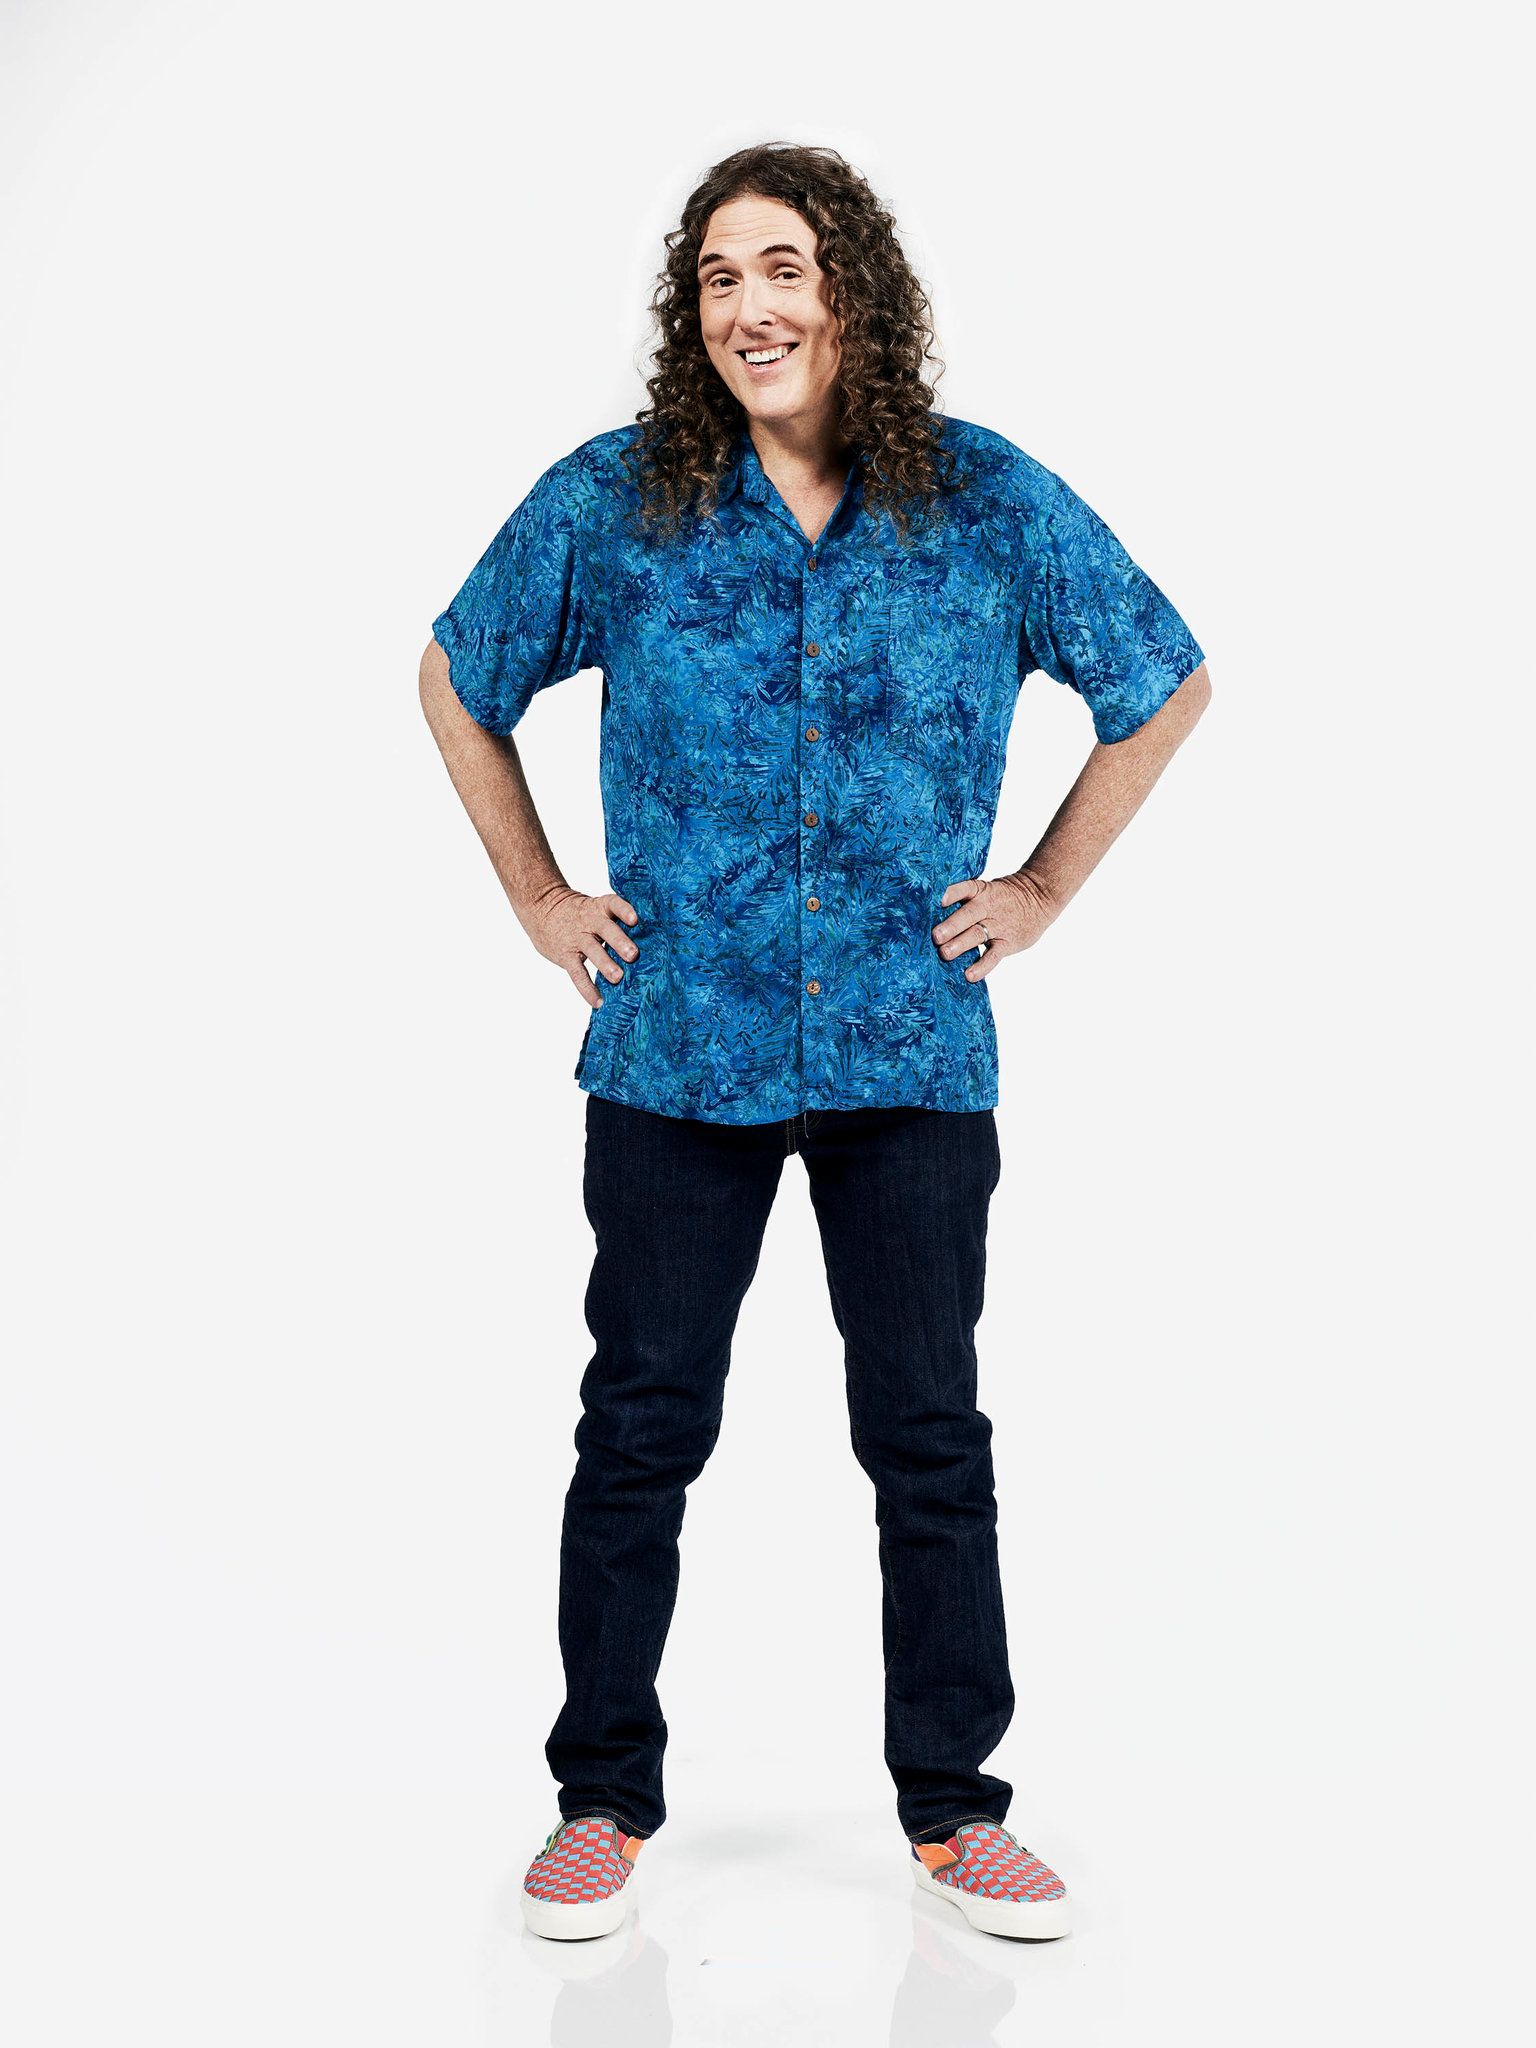 The Weirdly Enduring Appeal of Weird Al Yankovic